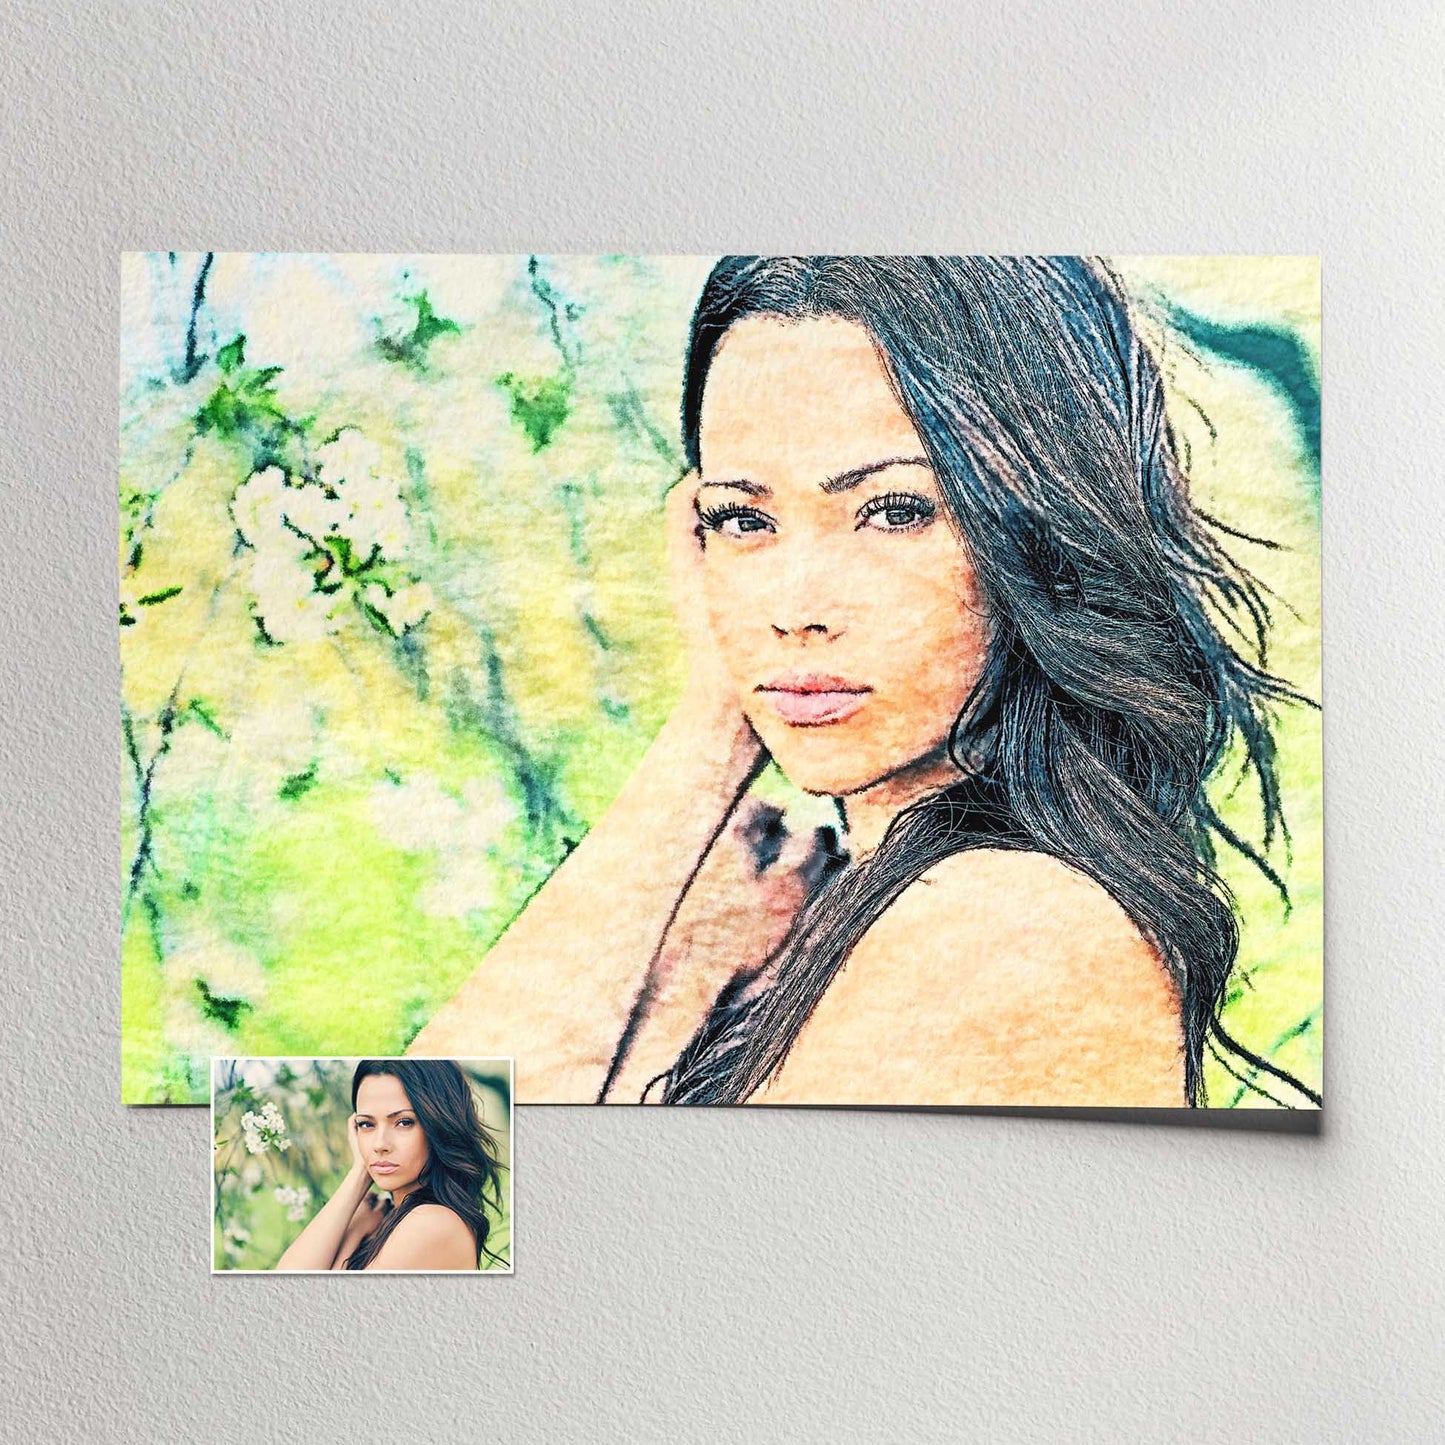 Personalised Watercolor Painting Print: Transform your cherished photo into a timeless piece of art with a watercolor effect. This classic and realistic painting captures the essence of your memories. It's a traditional and elegant gift